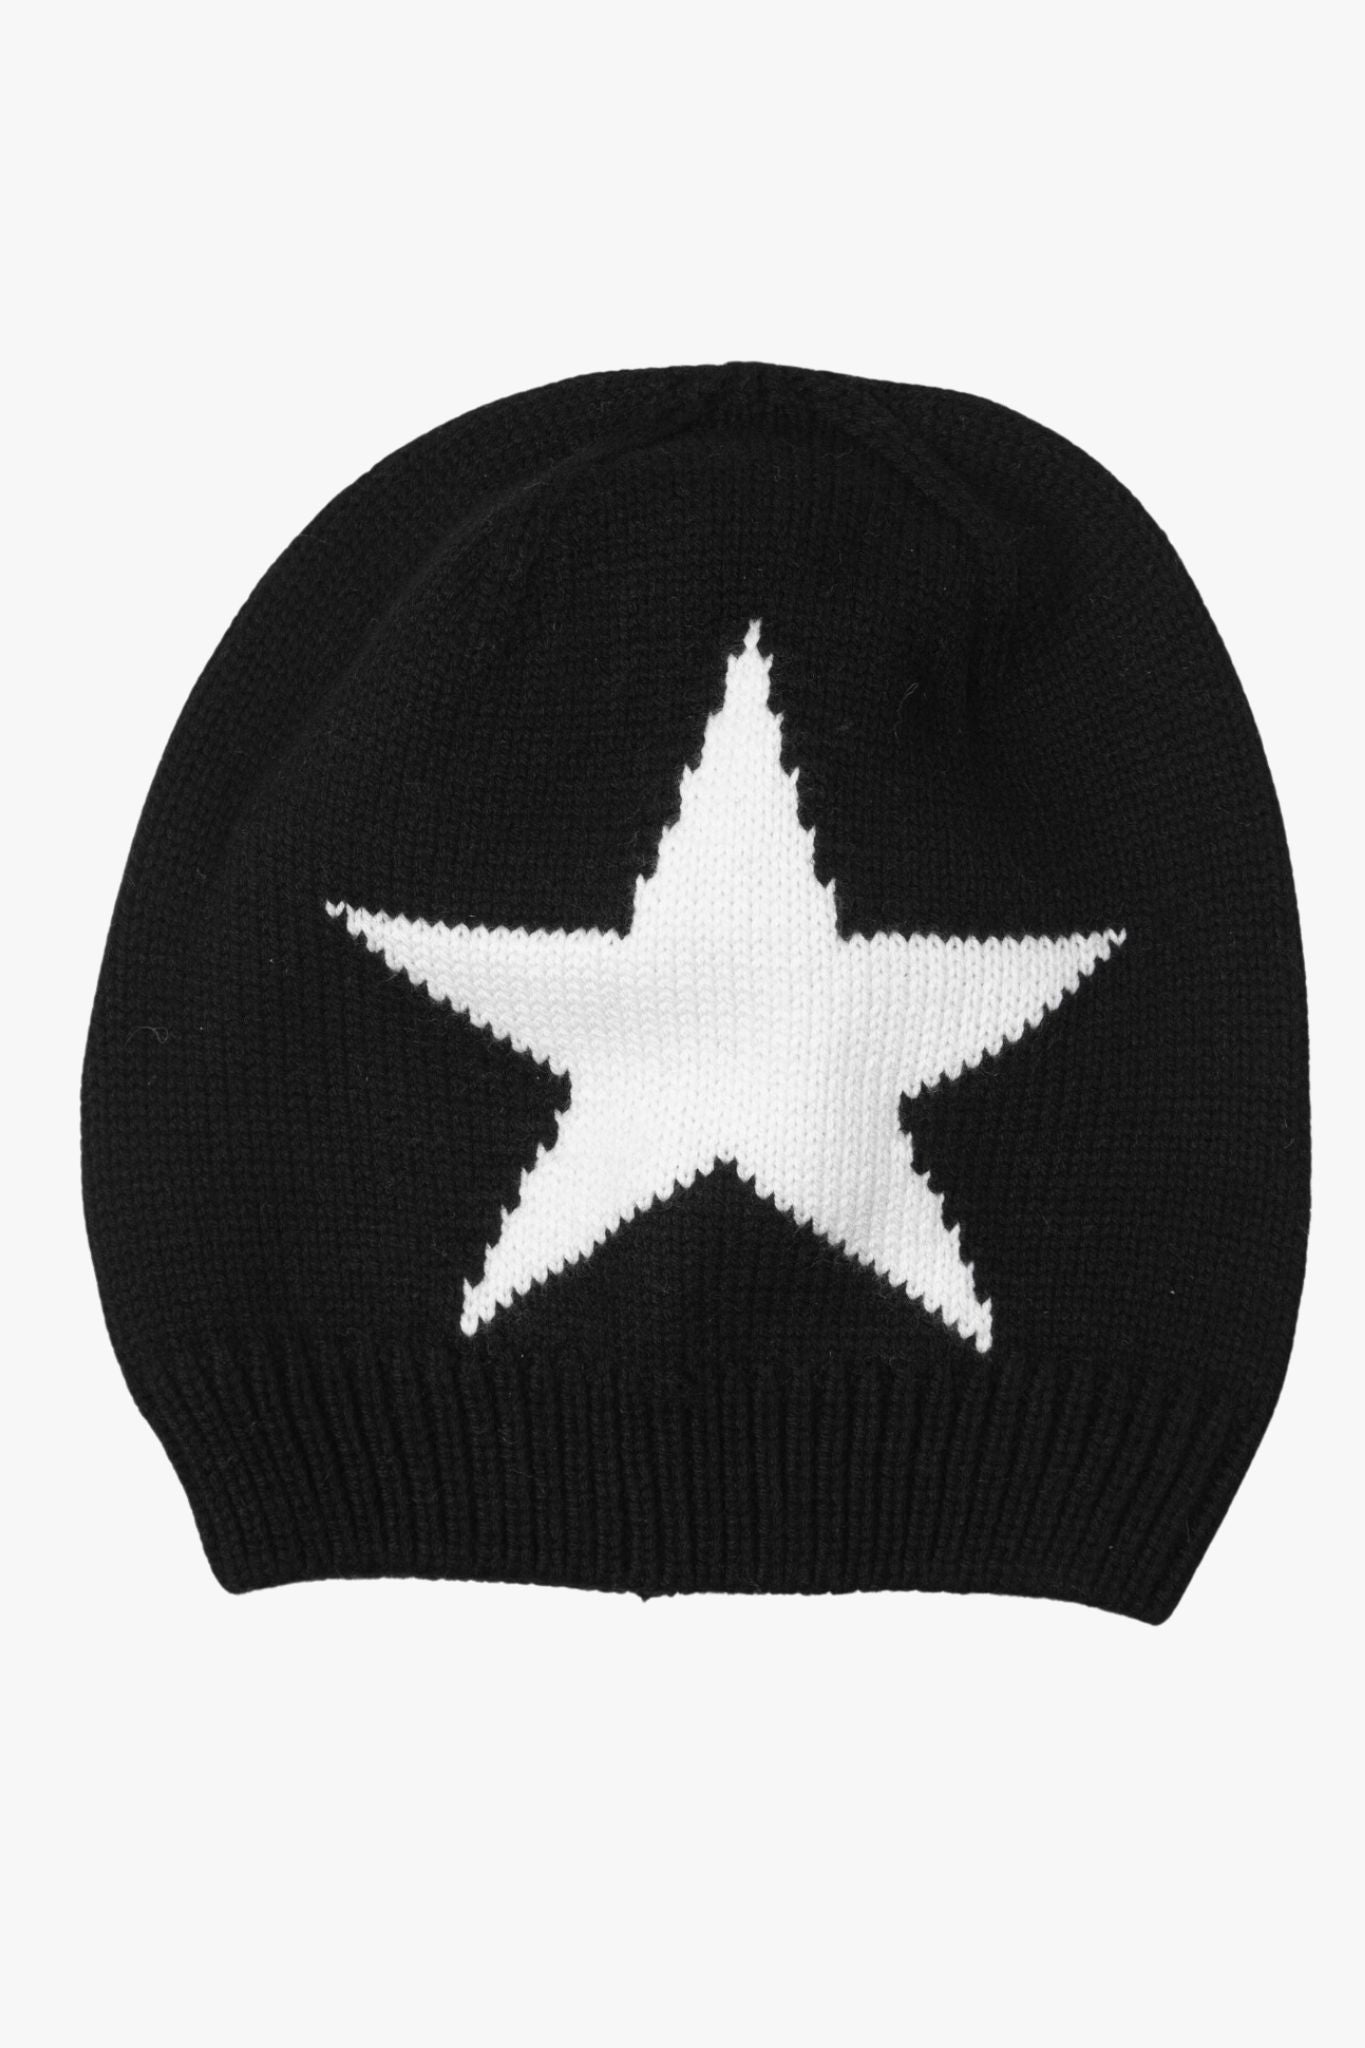 black knitted beanie hat with a large white star on the front